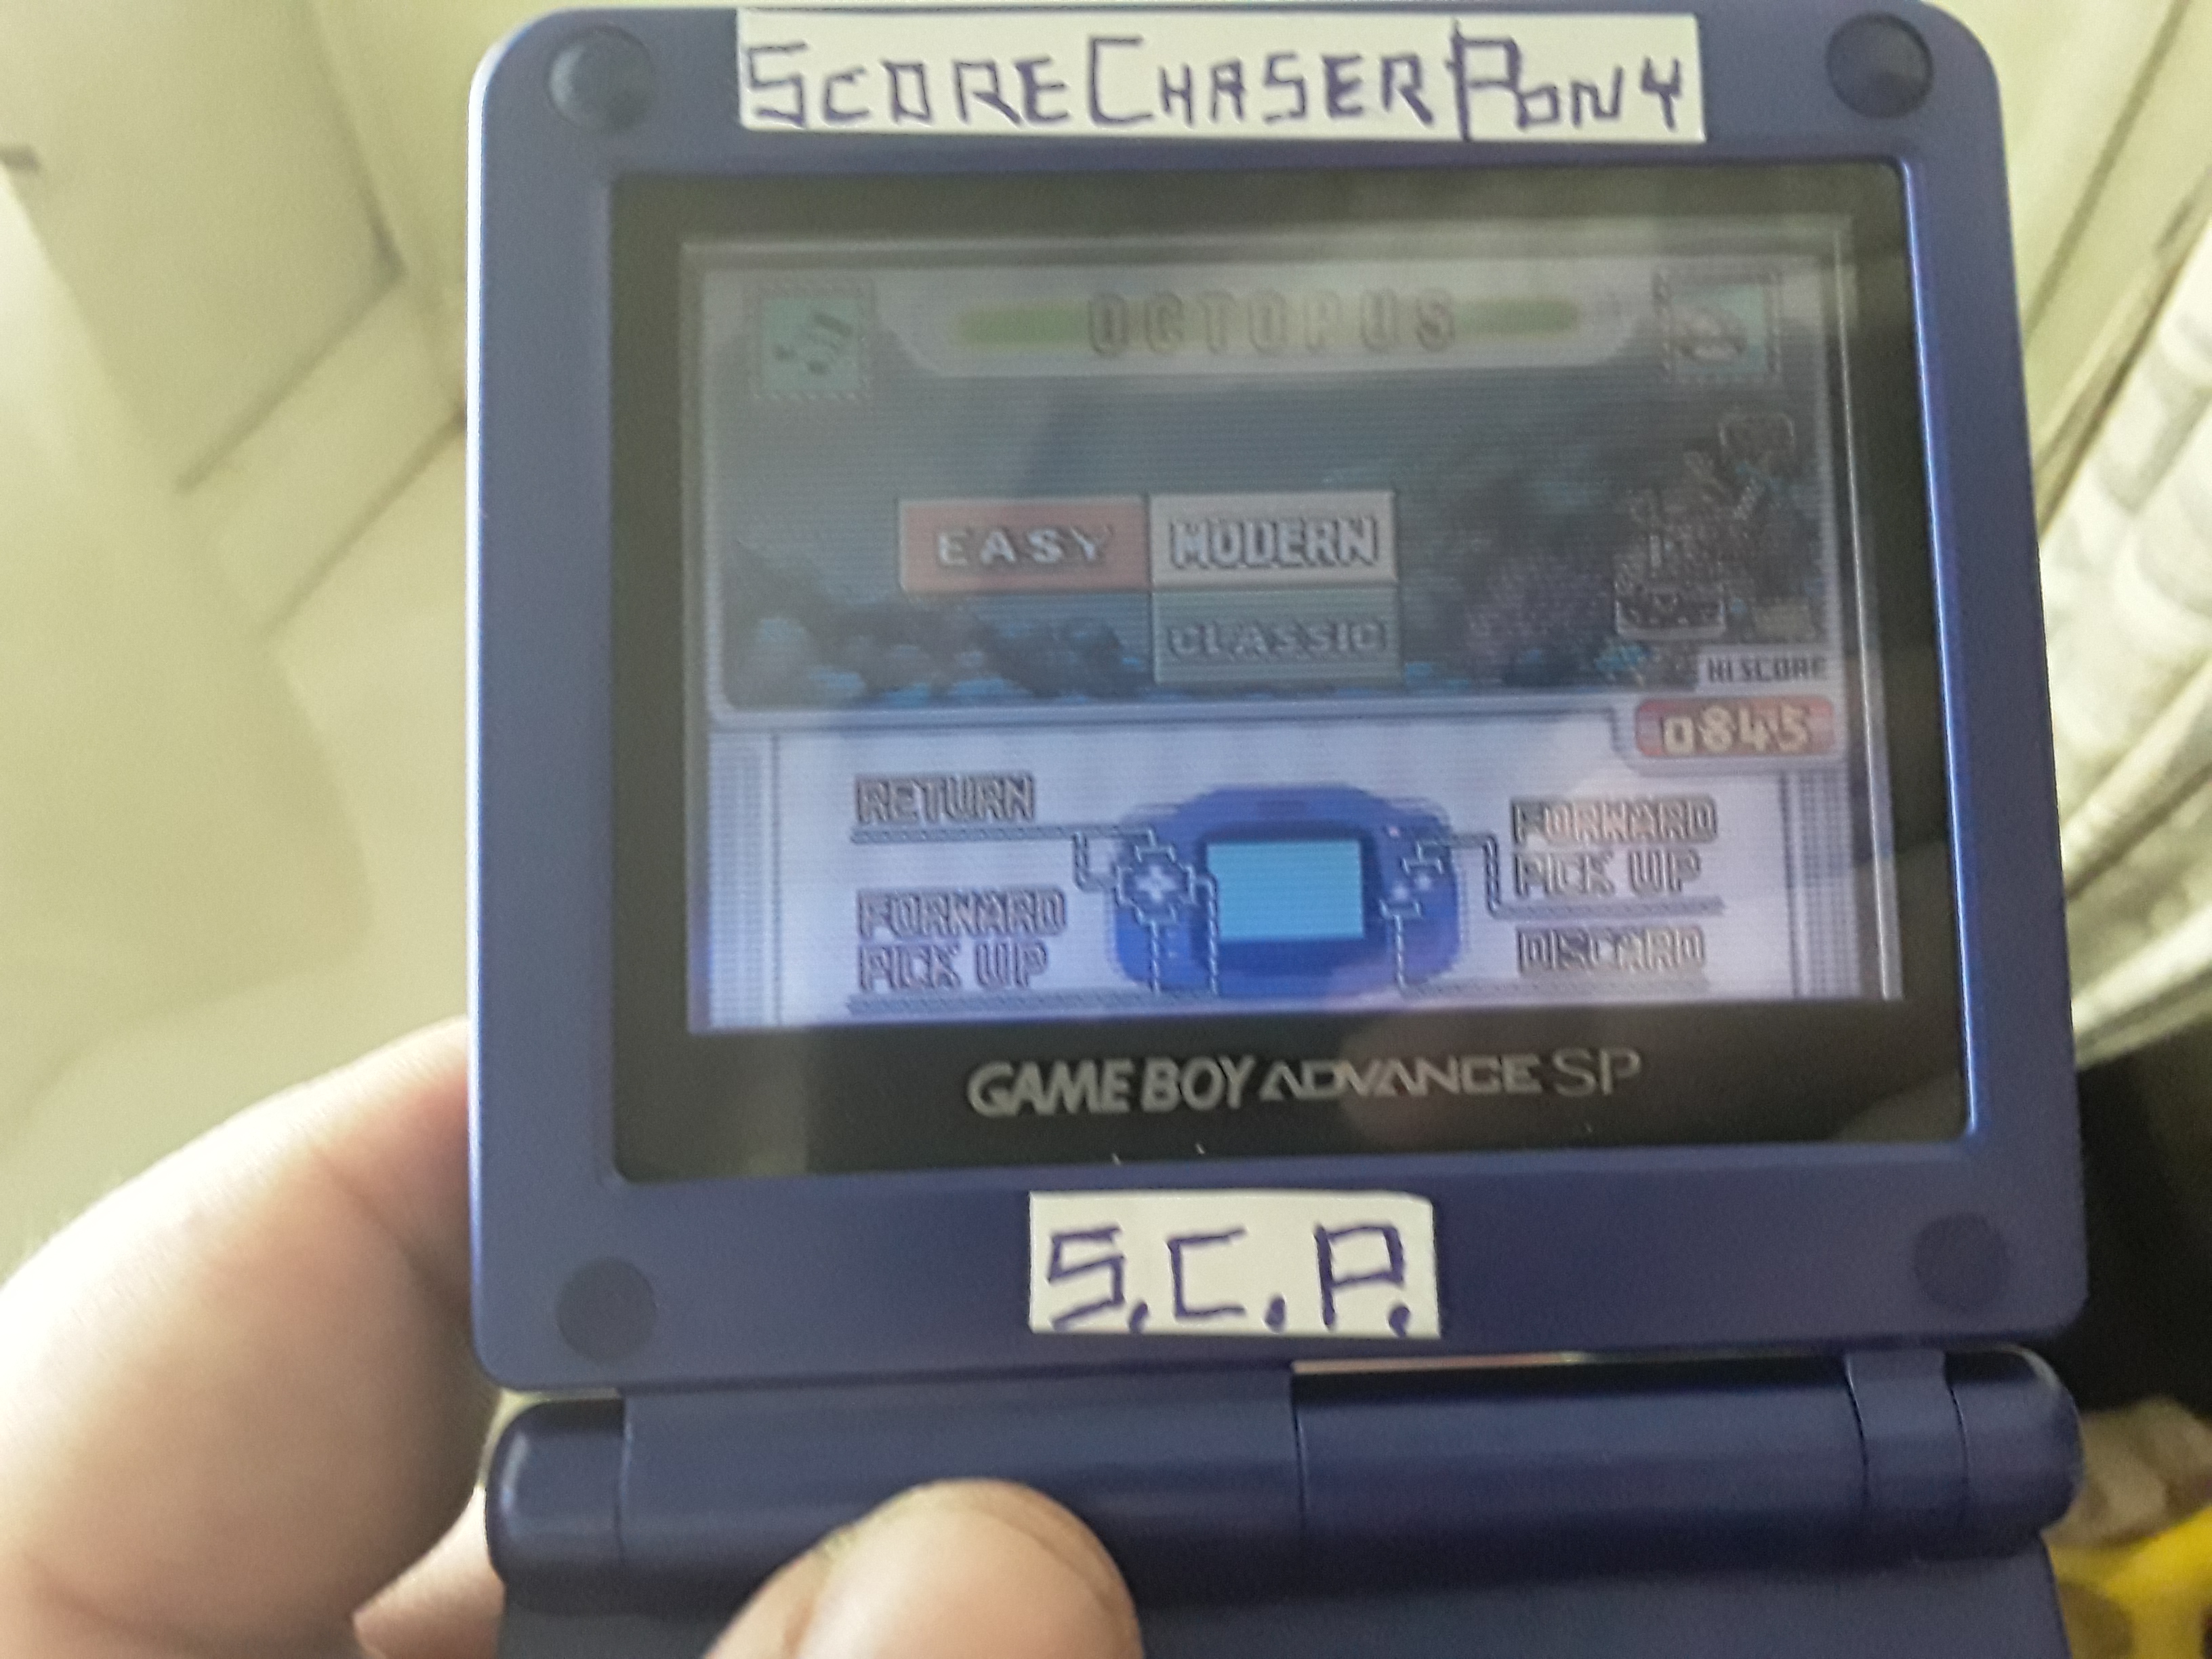 Scorechaserpony: Game & Watch Gallery 4: Octopus [Modern: Easy] (GBA) 845 points on 2019-07-31 15:51:23